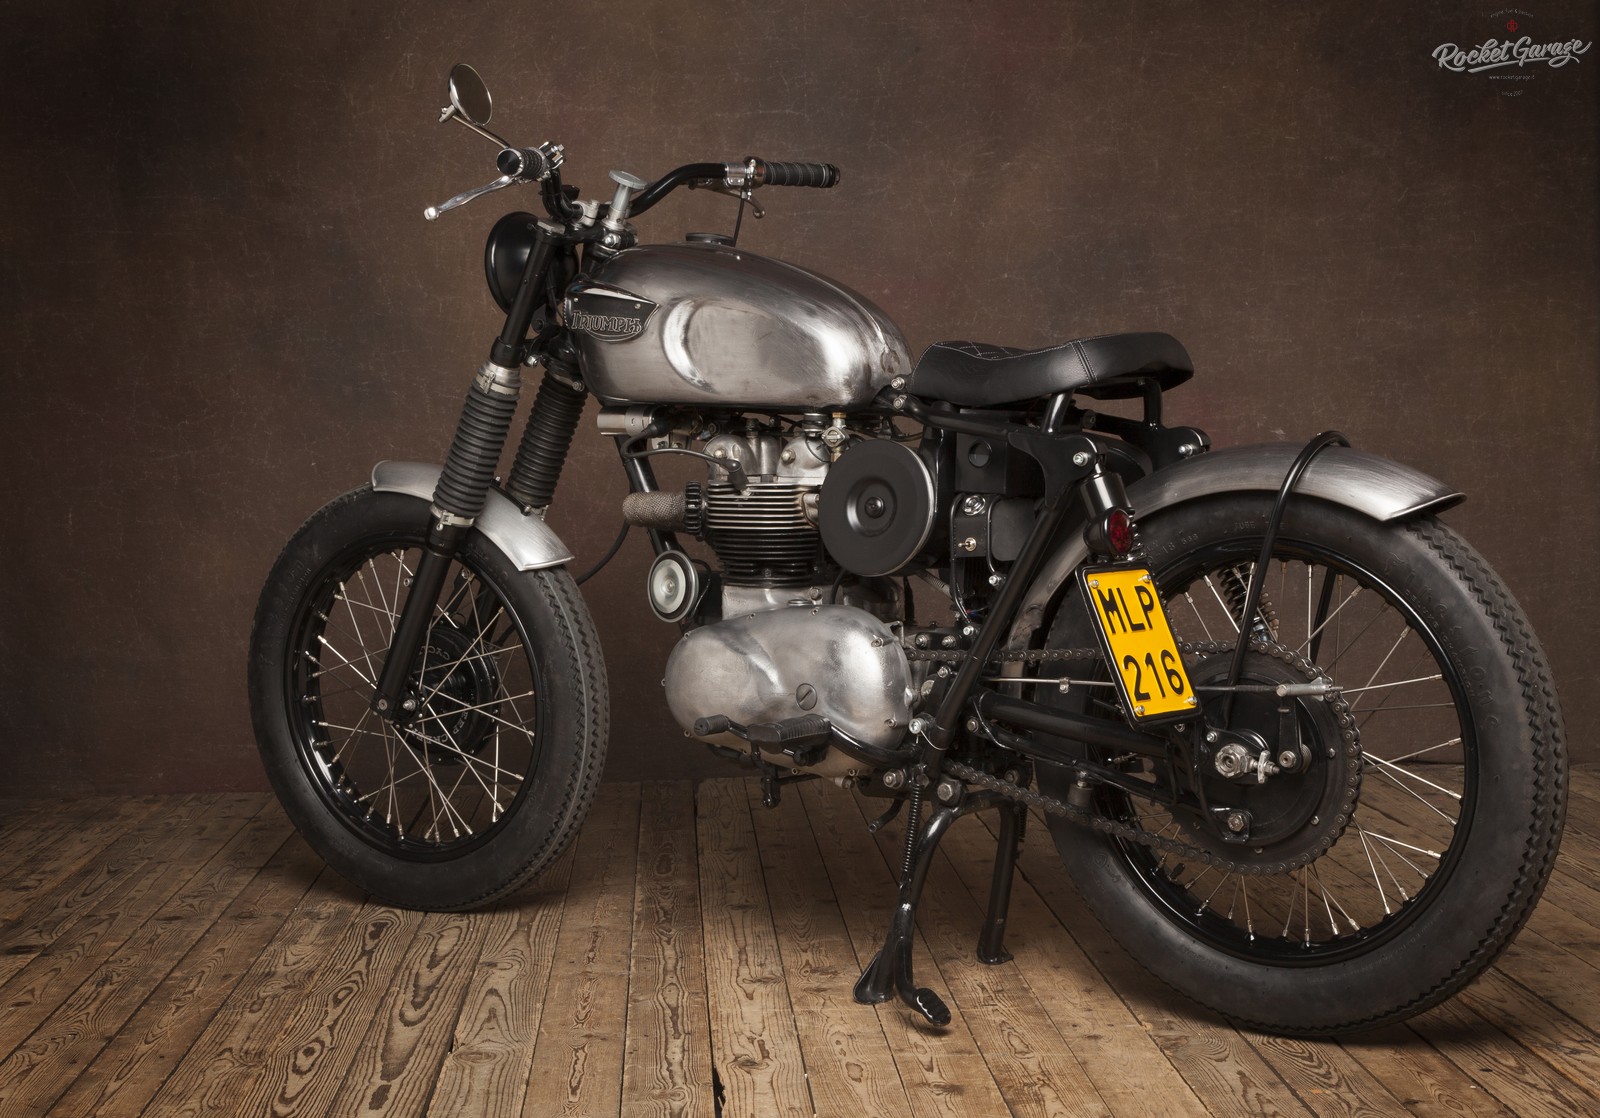 Who wants to win this Triumph Bonneville restomod?